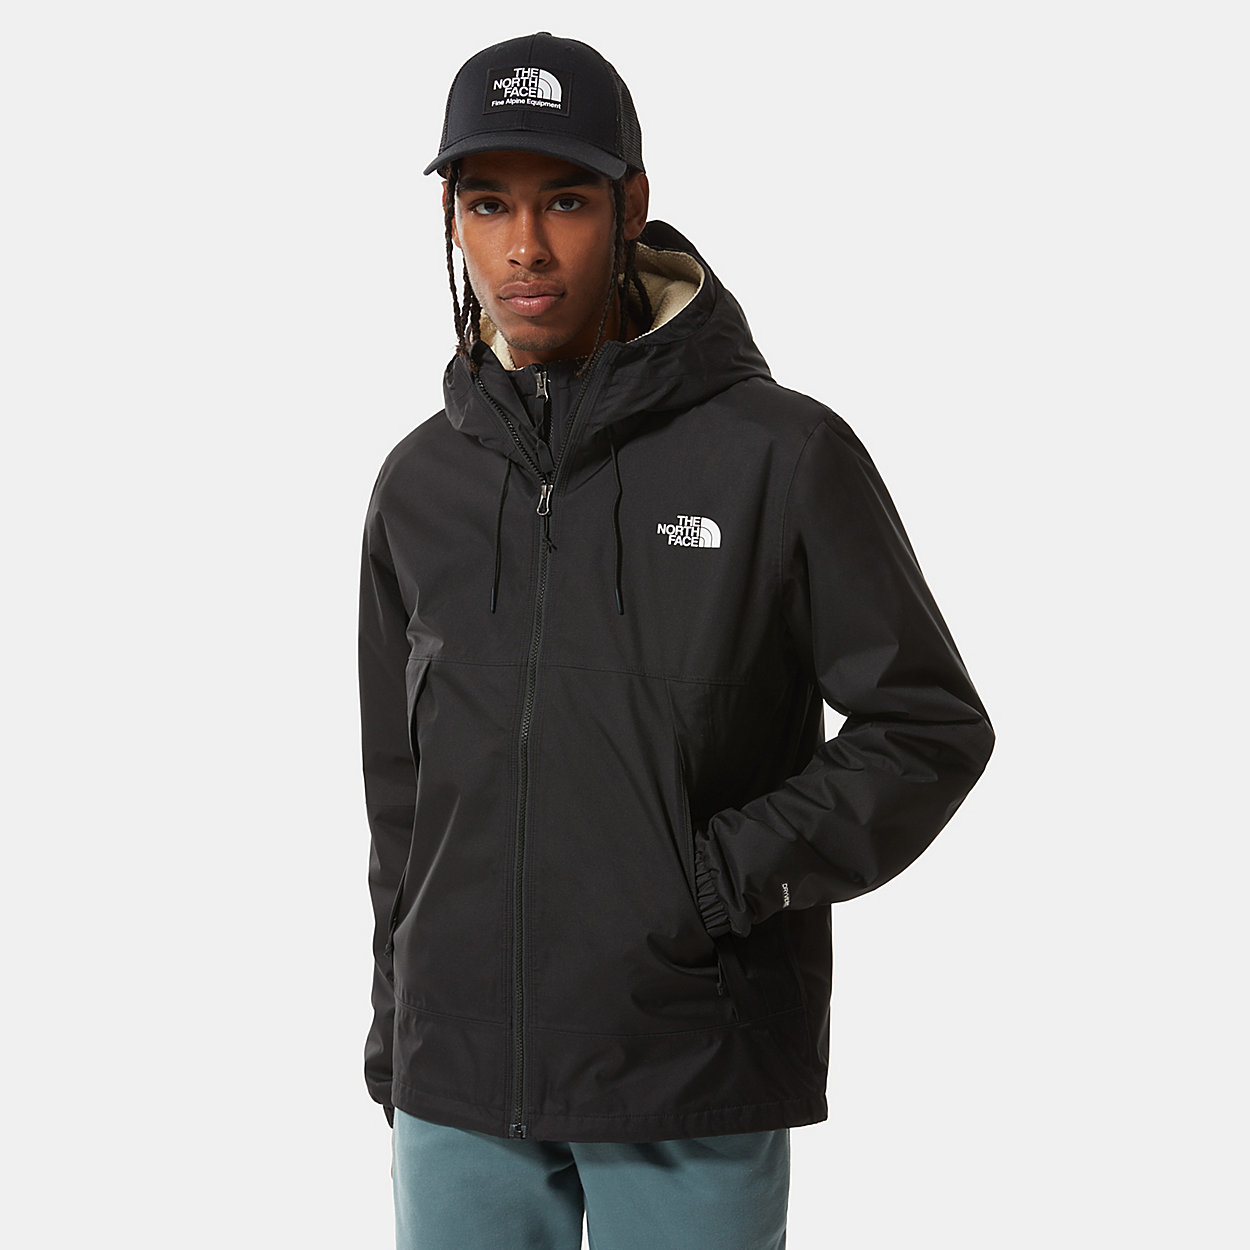 Unlock Wilderness' choice in the Trespass Vs North Face comparison, the Mountain Q Jacket by The North Face